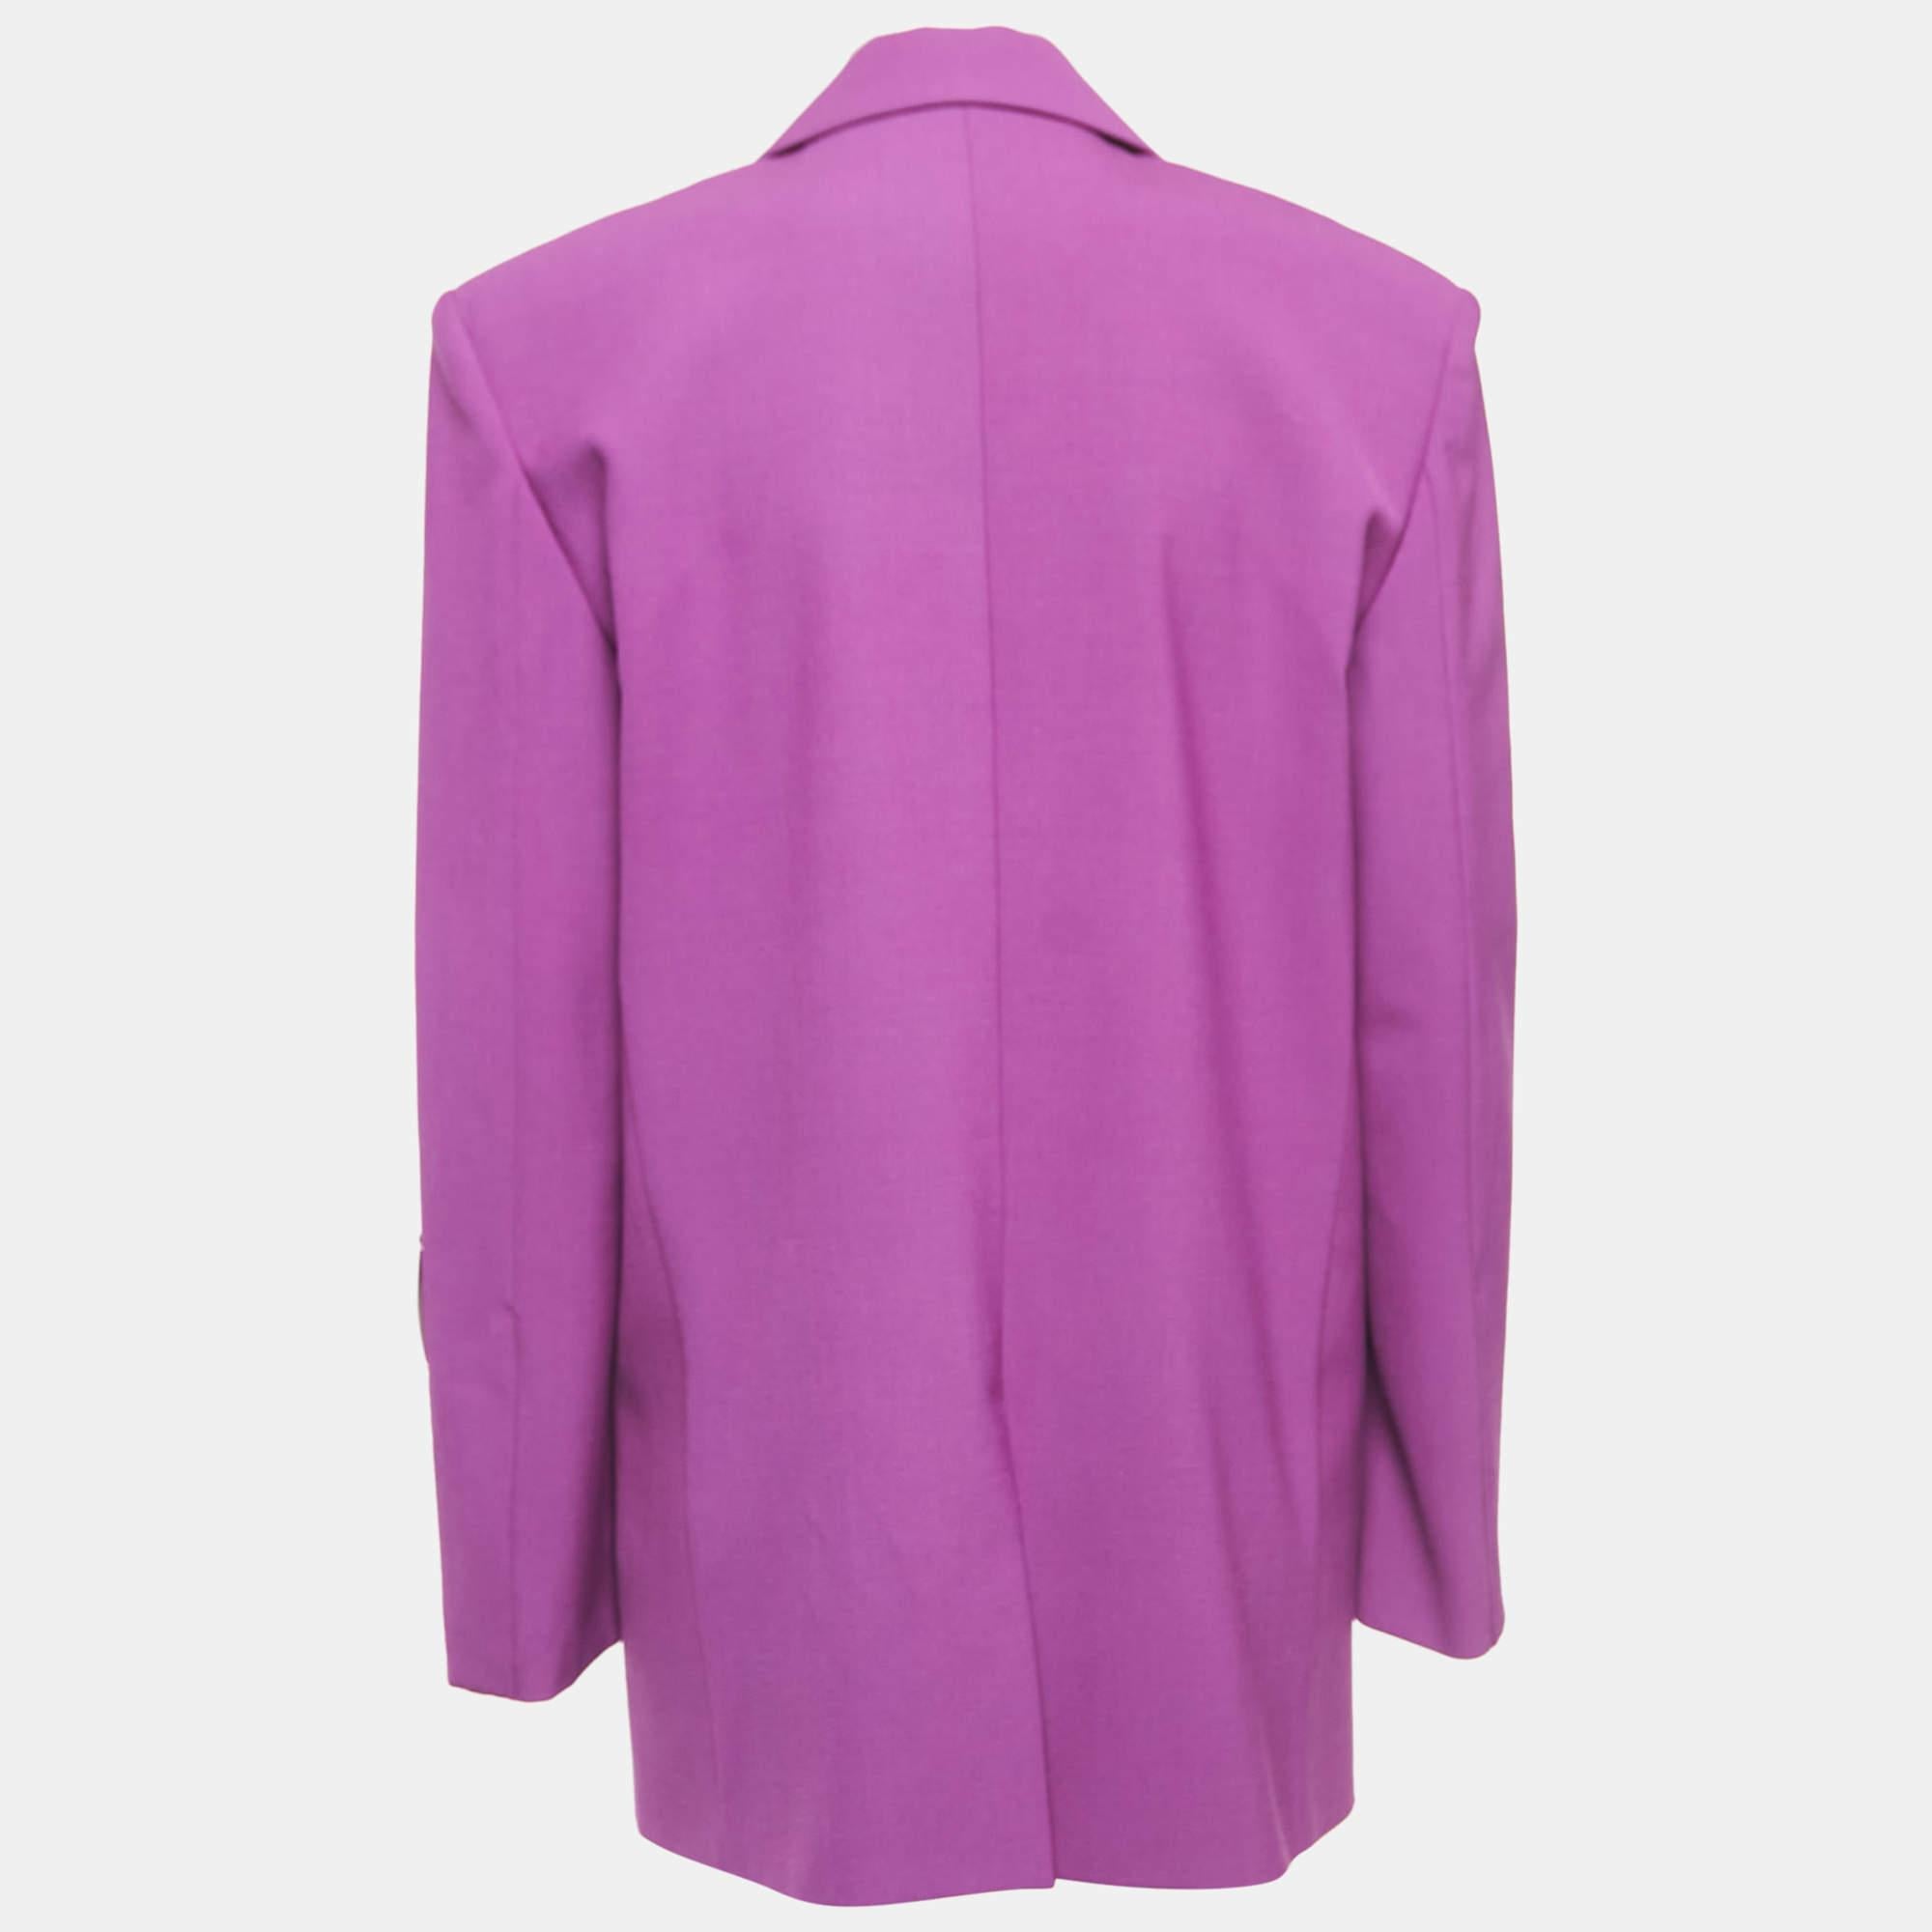 The purple shade and the oversized shape make this Off-White blazer for women a covetable piece. It has long sleeves and a single-breasted front closure. Wear this one for an effortlessly chic look.

